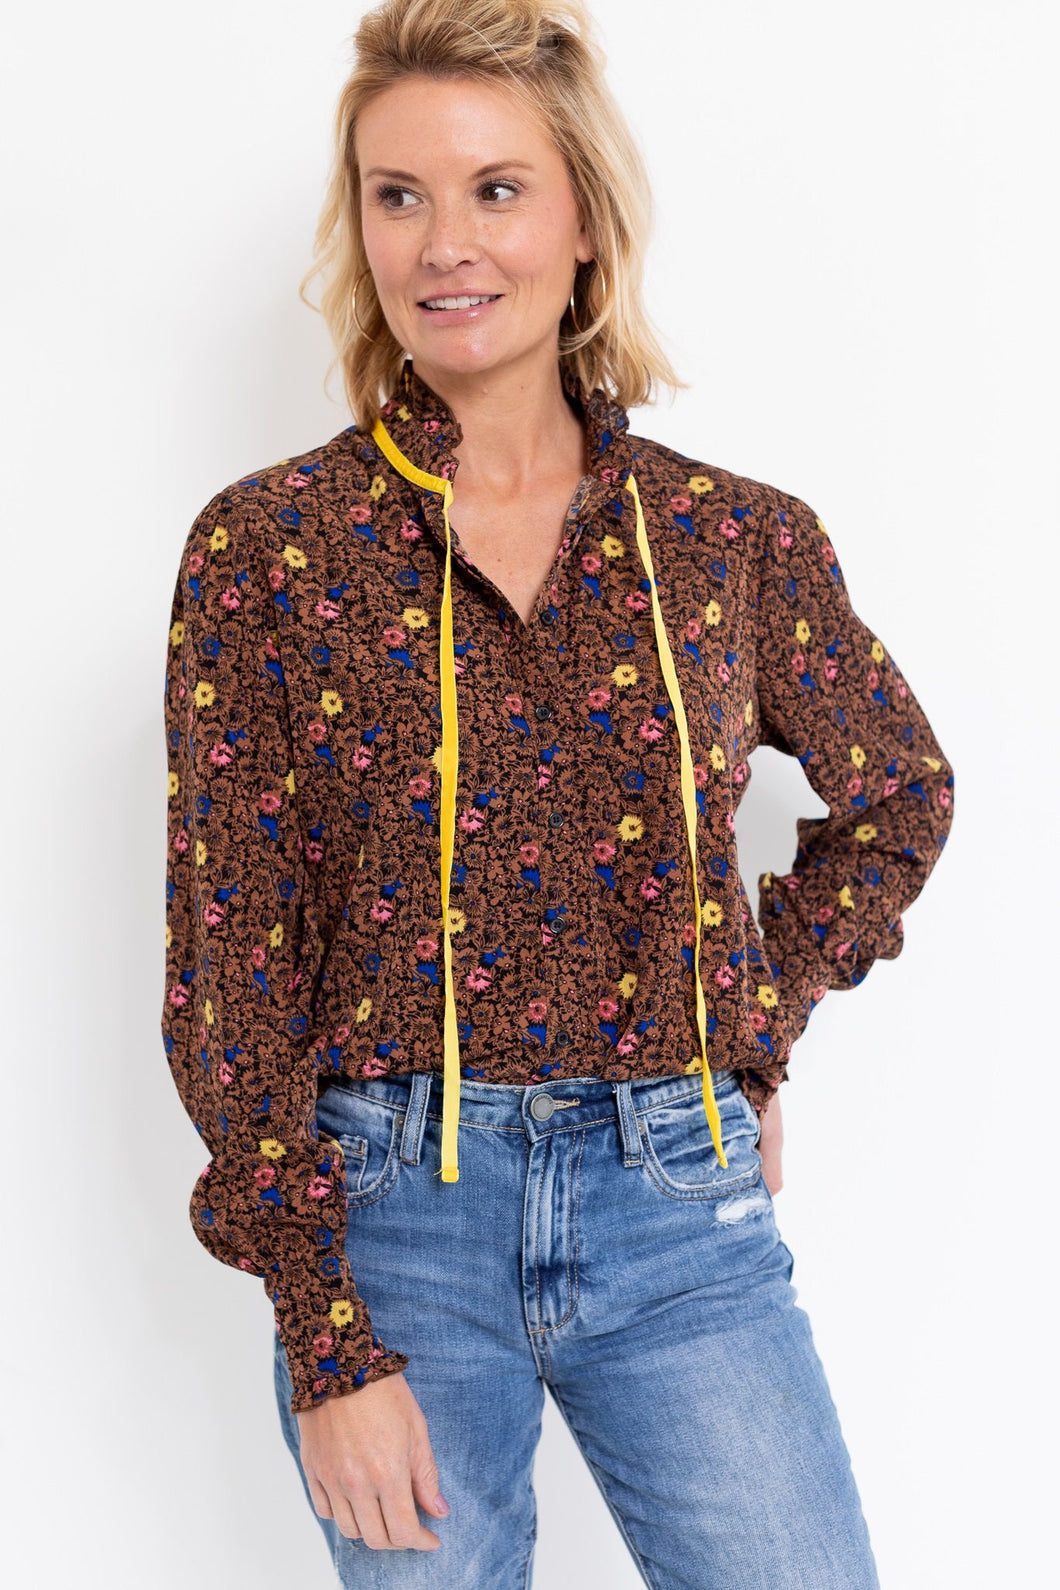 The Joss Shirt in Brown Floral